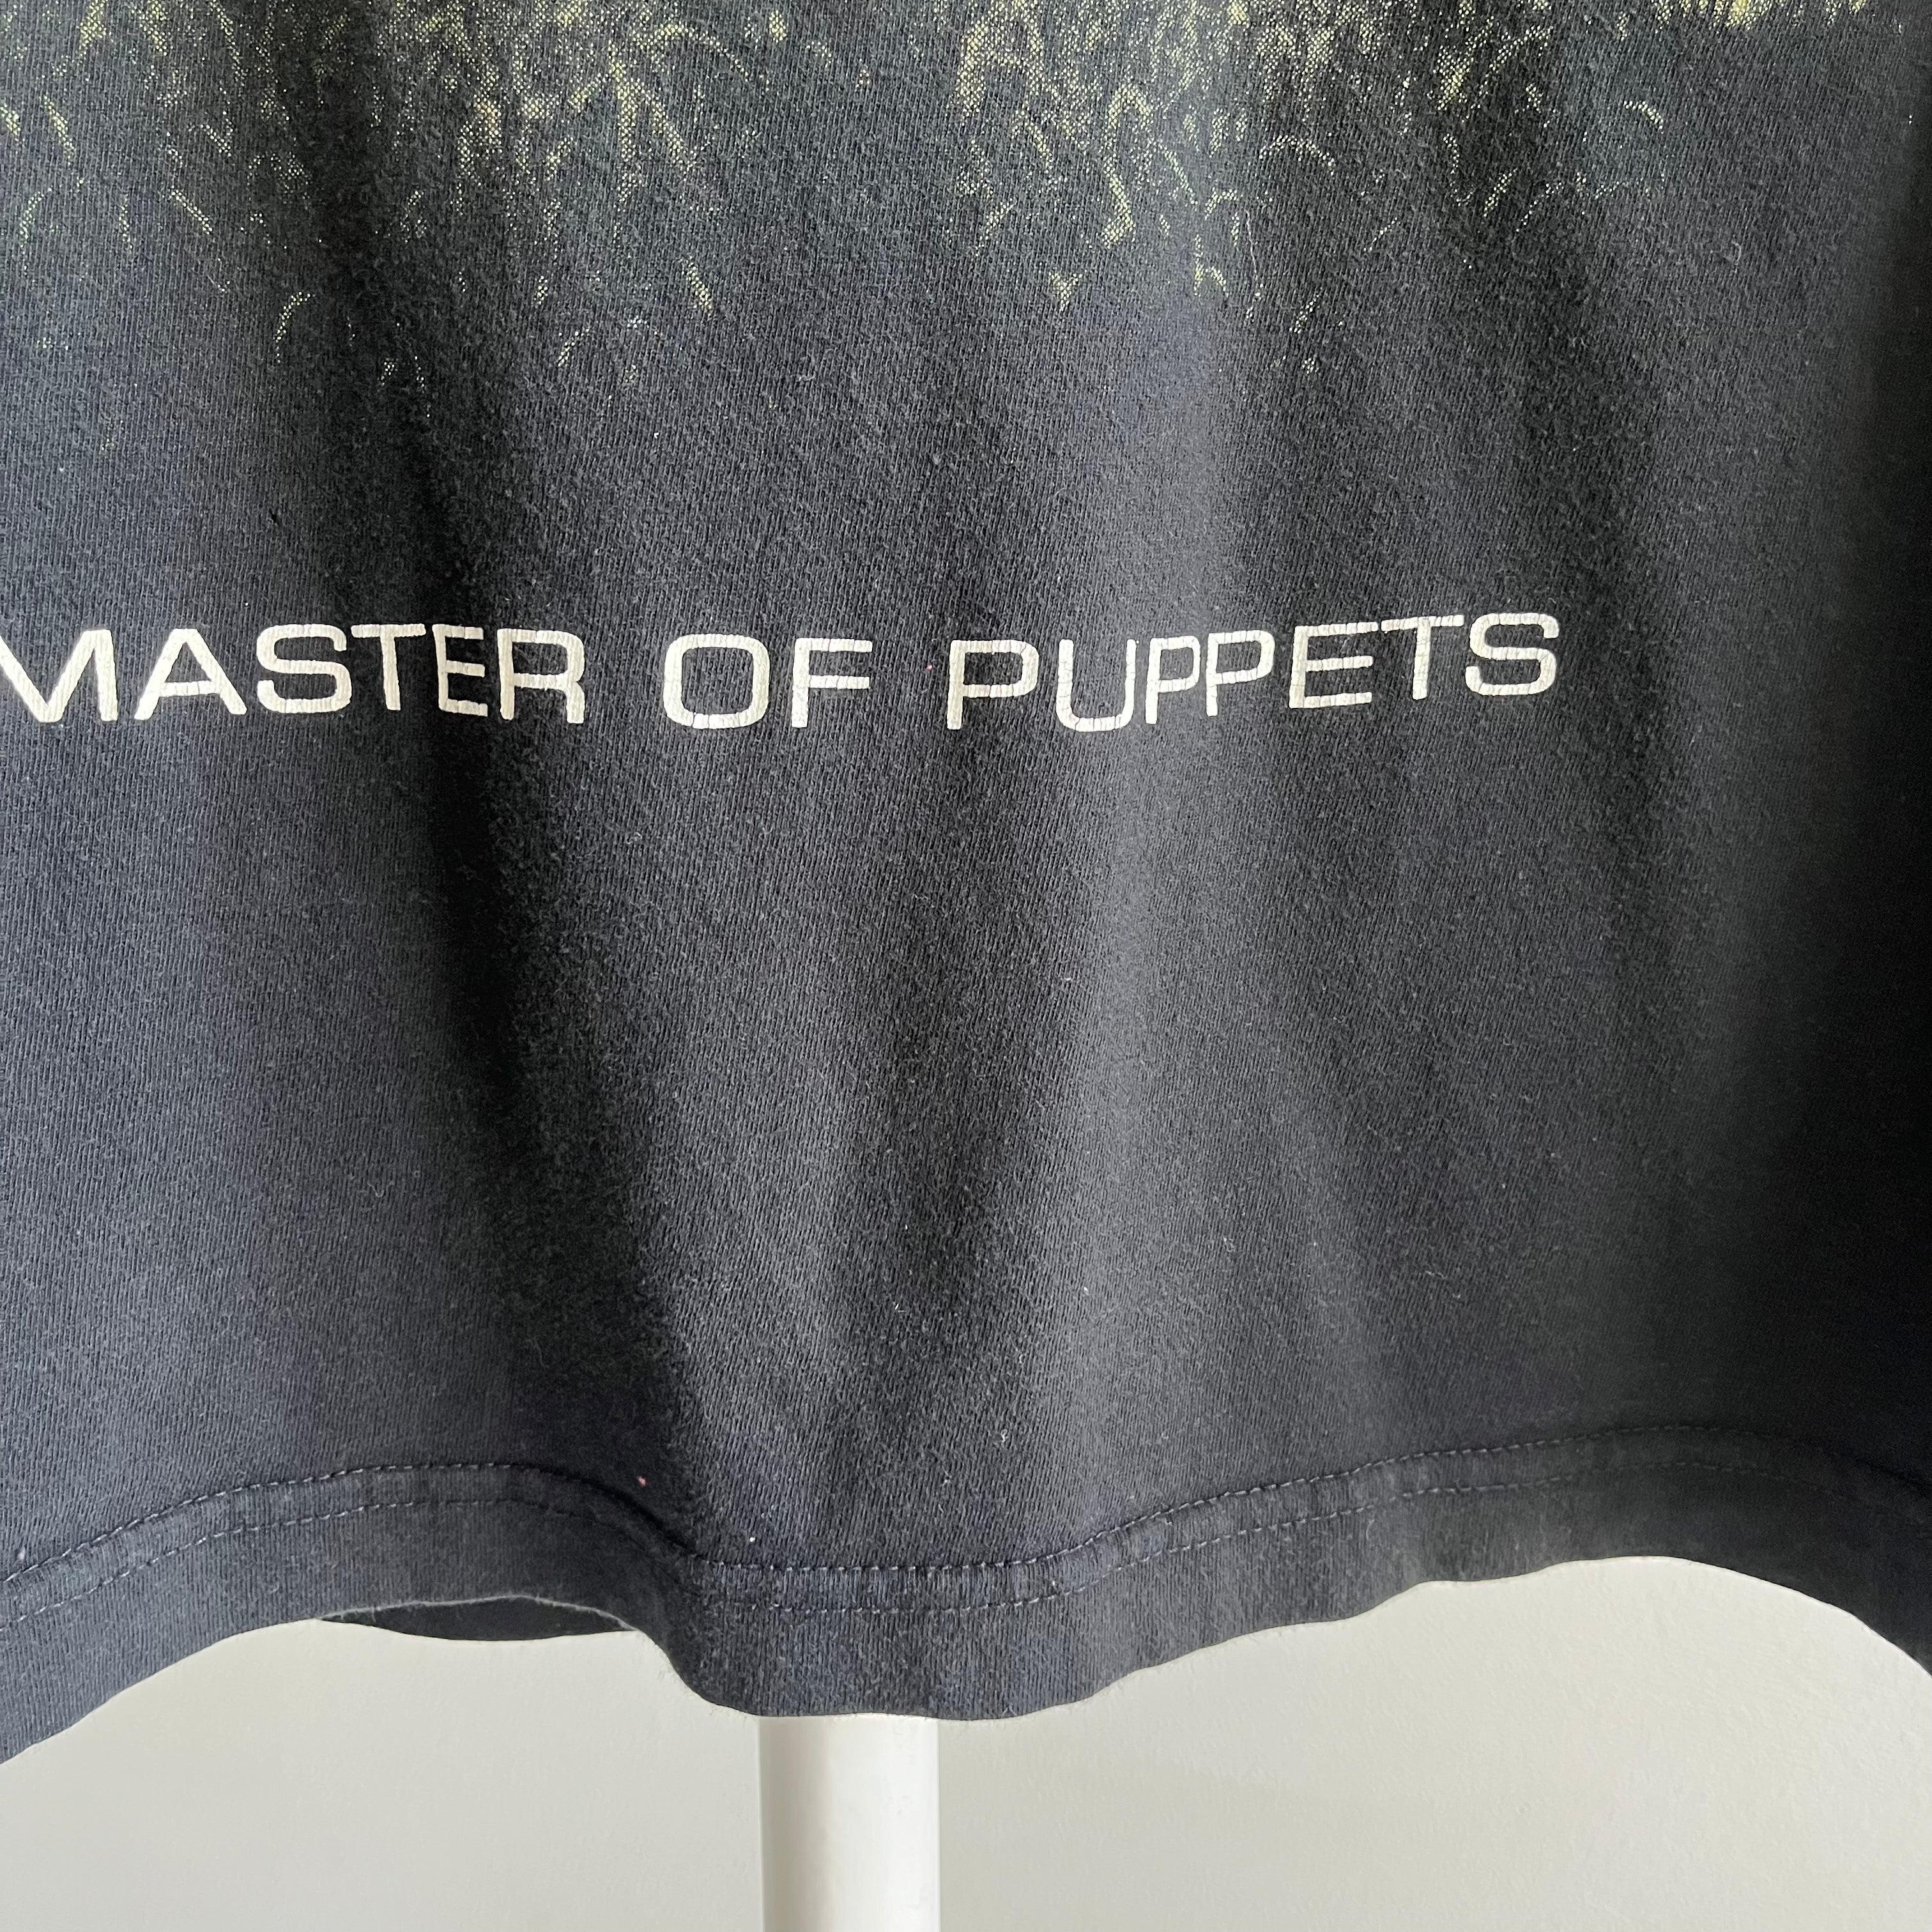 Not Vintage Metallica - Masters of Puppets - Reprint T-Shirt